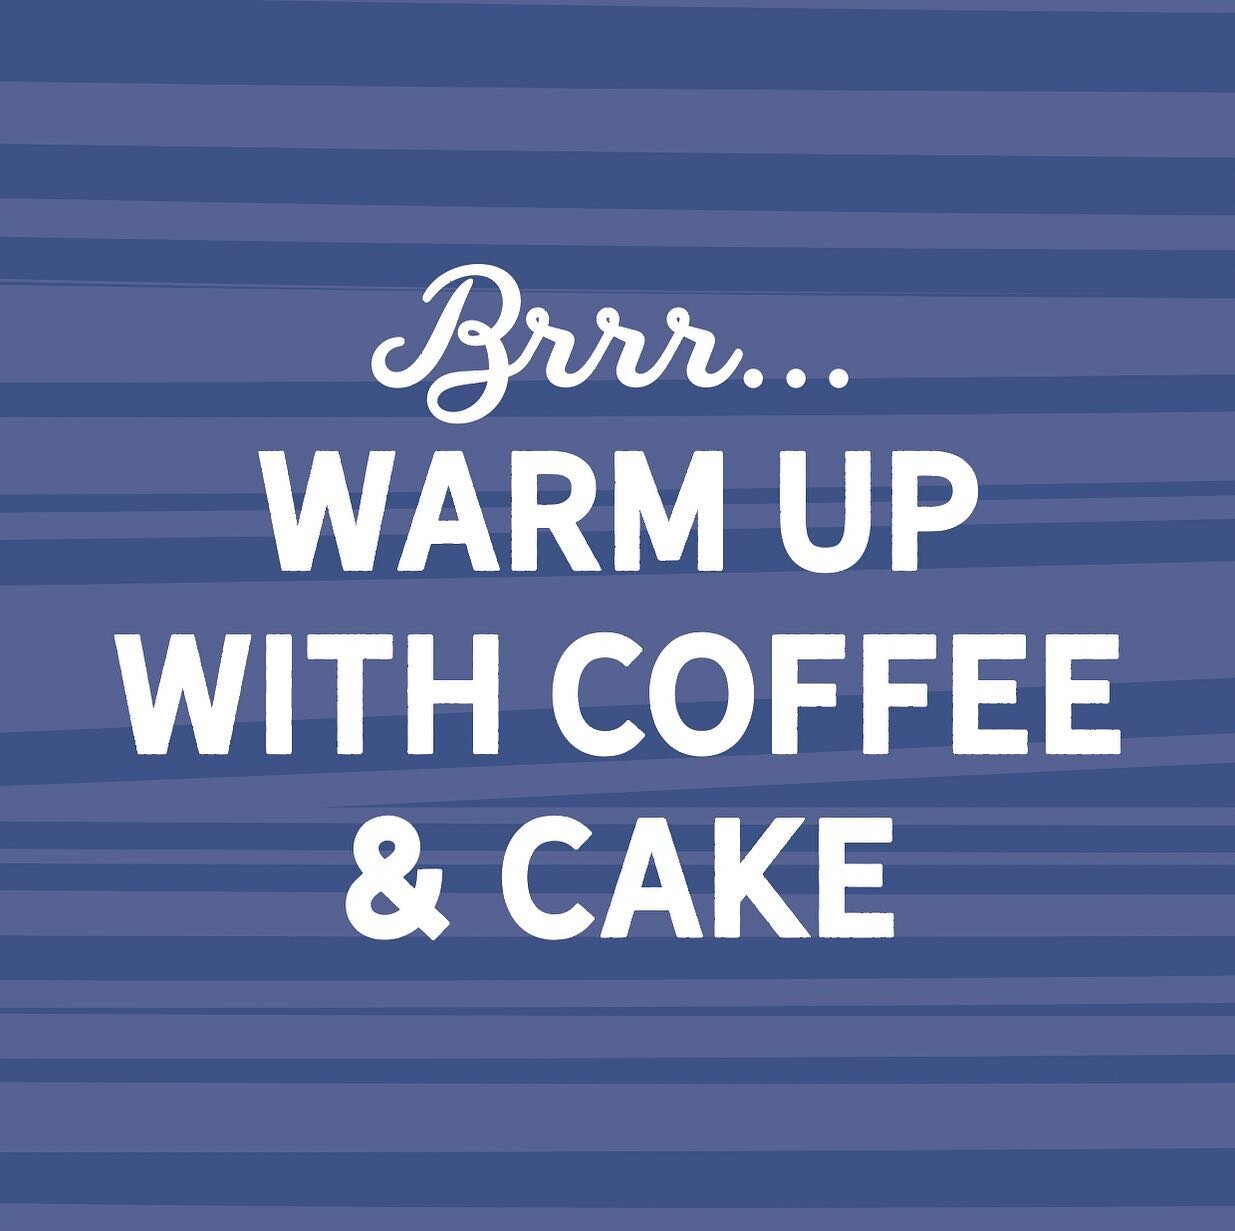 Brrr... it's cold outside. ❄️
But there's nothing like a Barista-made coffee ☕ and delicious cake 🍰 to warm up on the inside. 💕✨

Get cosy and spread the warmth at one of our country bakeries.
#beechworth #healesville #ballarat #bendigo #echuca #al